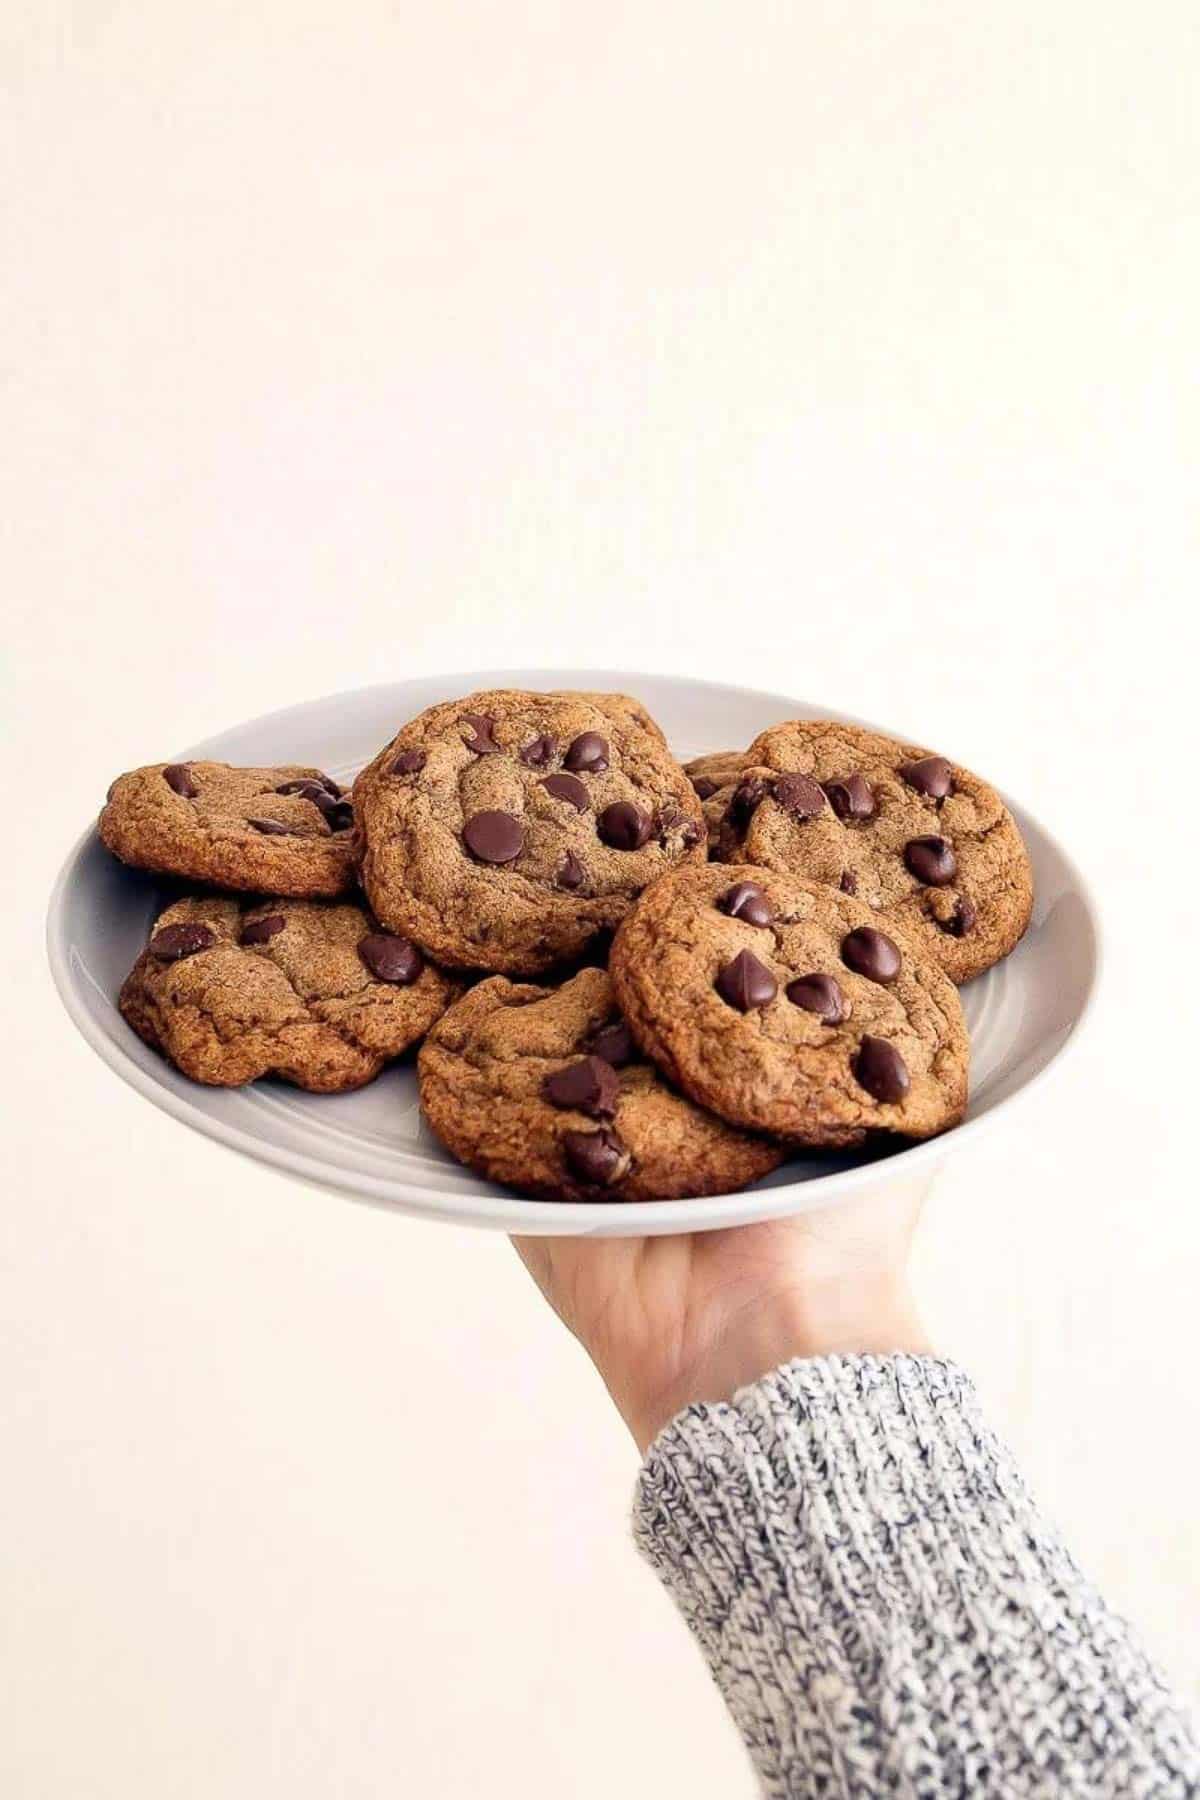 Arm wearing sweater holding up a grey plate of healthy chocolate chip cookies.